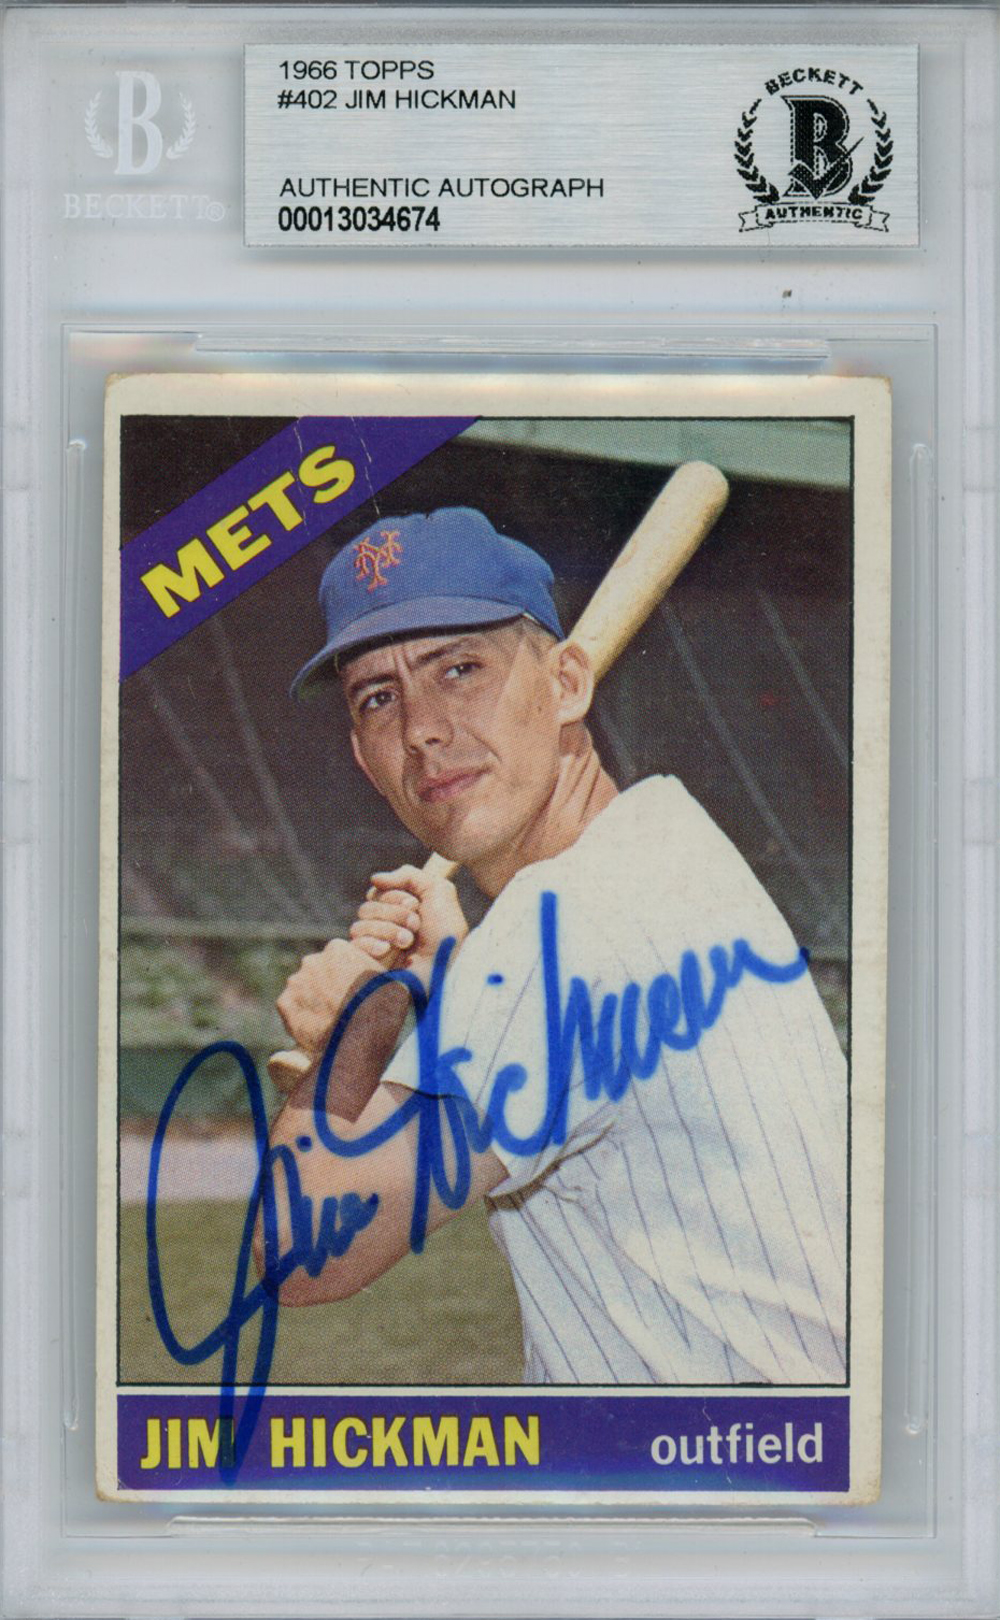 Jim Hickman Autographed/Signed 1966 Topps #402 Trading Card Beckett Slab